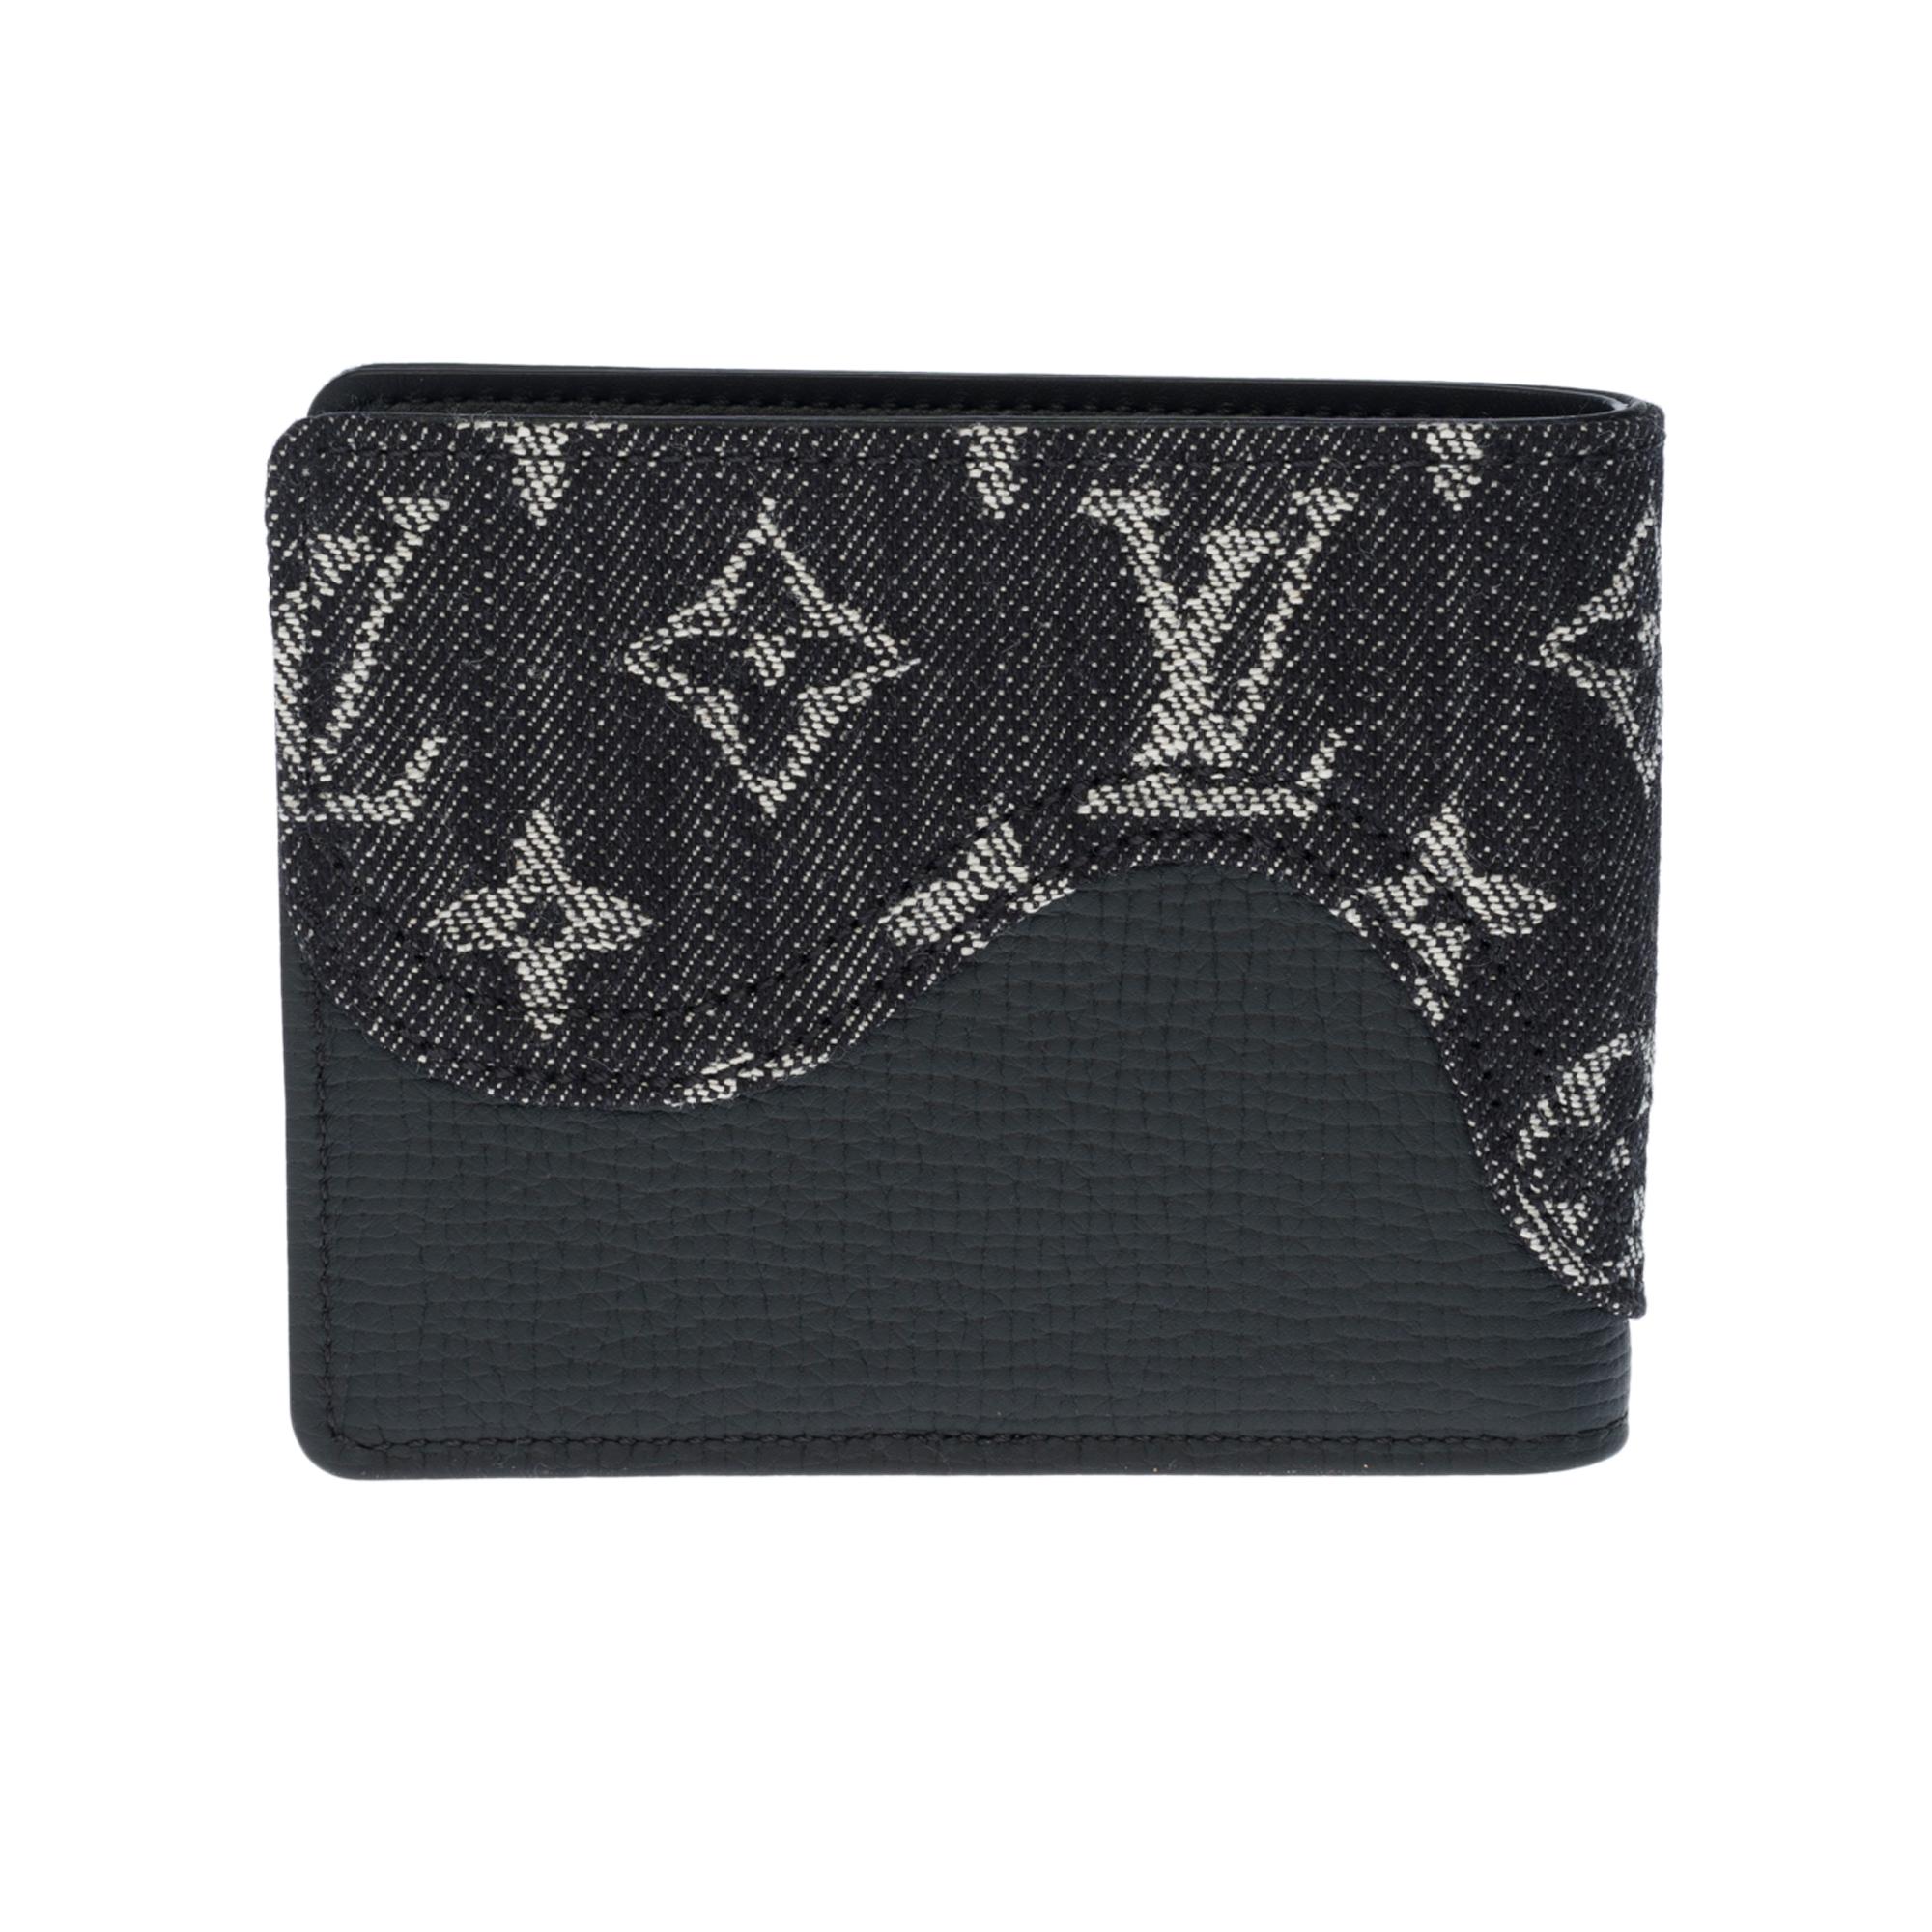 For the Spring 2022 pre-collection, Japanese streetwear designer Nigo revisits this Slender wallet in a dressed version of his Monogram Drip. The emblematic motif with a vague effect highlighted by a red heart is displayed here on black denim and